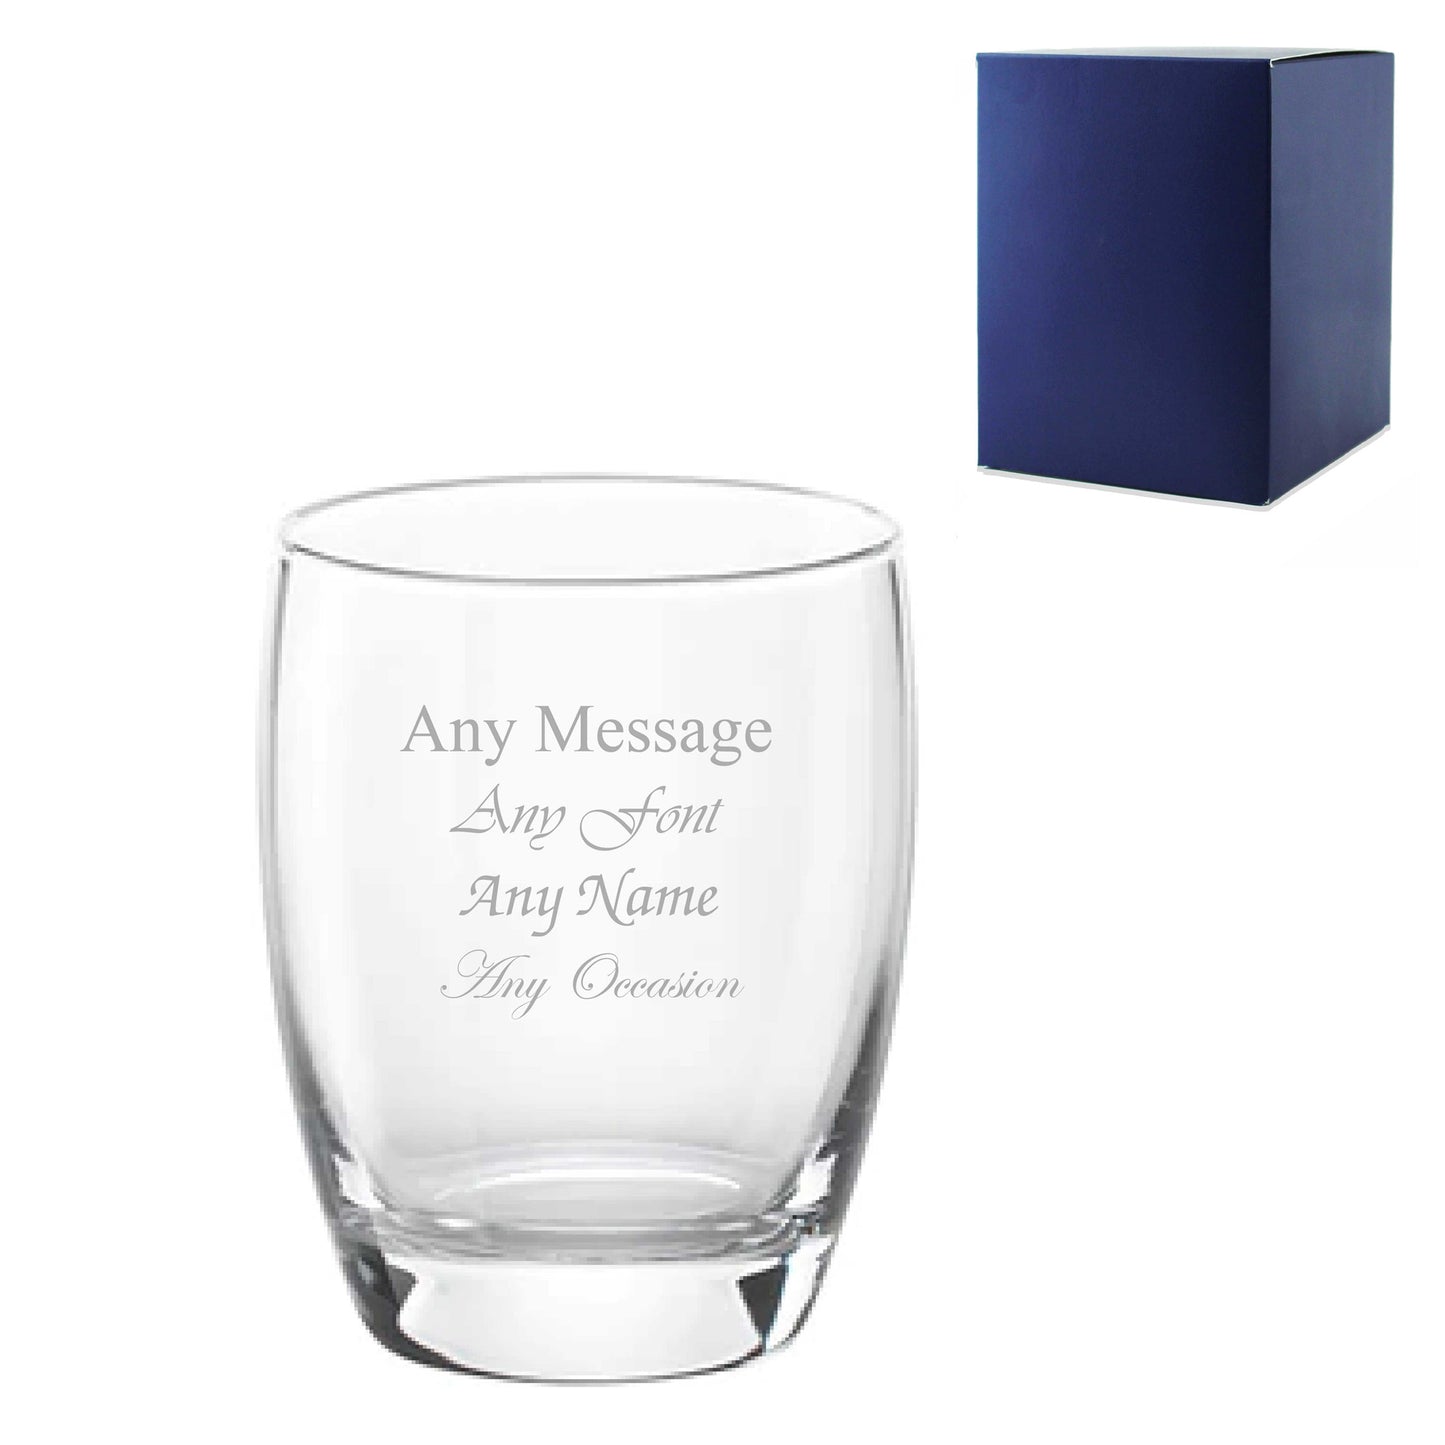 Engraved 300ml Curved Tumbler with Gift Box Image 2